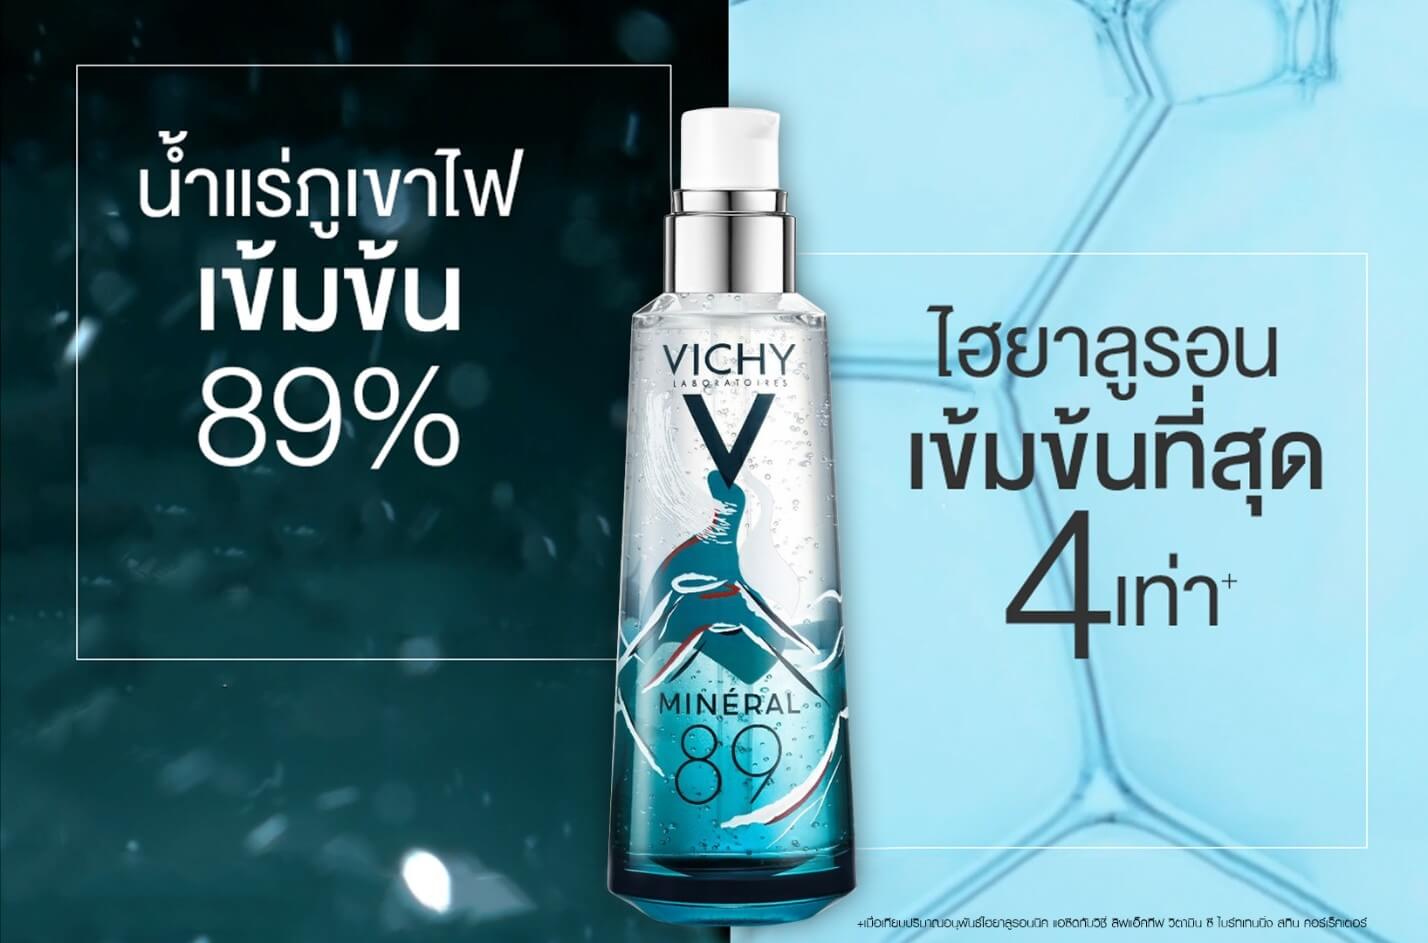 VICHY MINERAL 89 LIMITED EDITION 2020 2